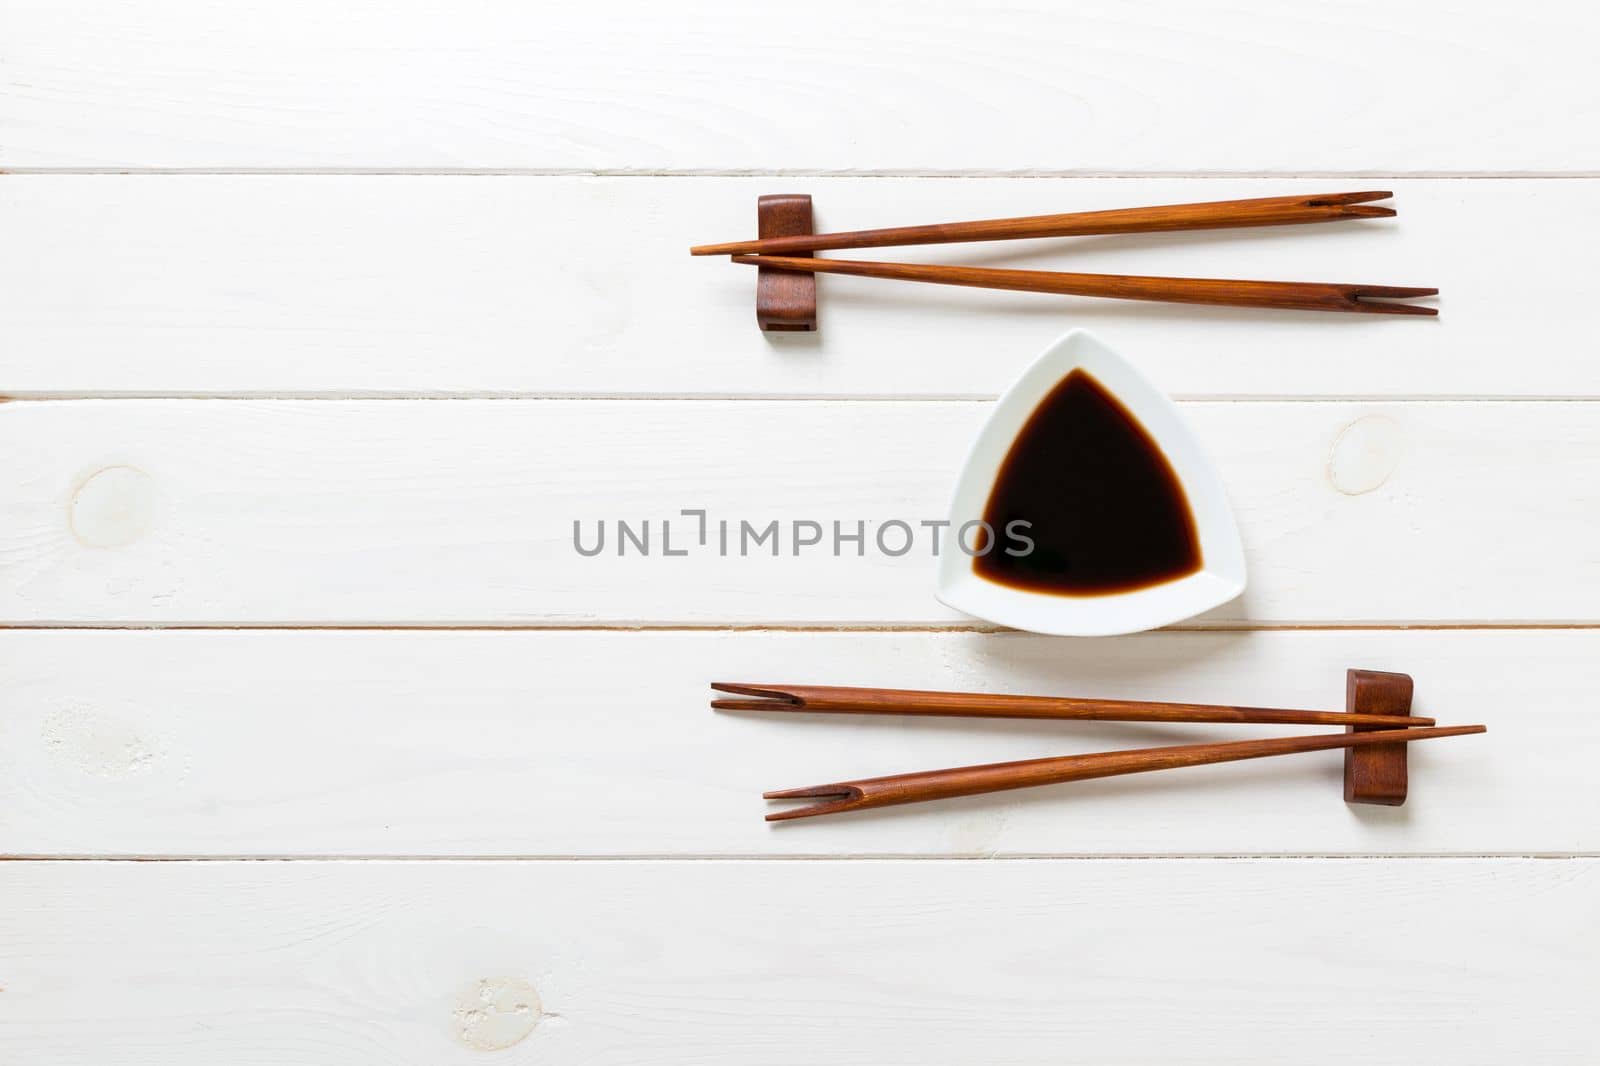 Soy sauce with chopsticks on white wooden table background.